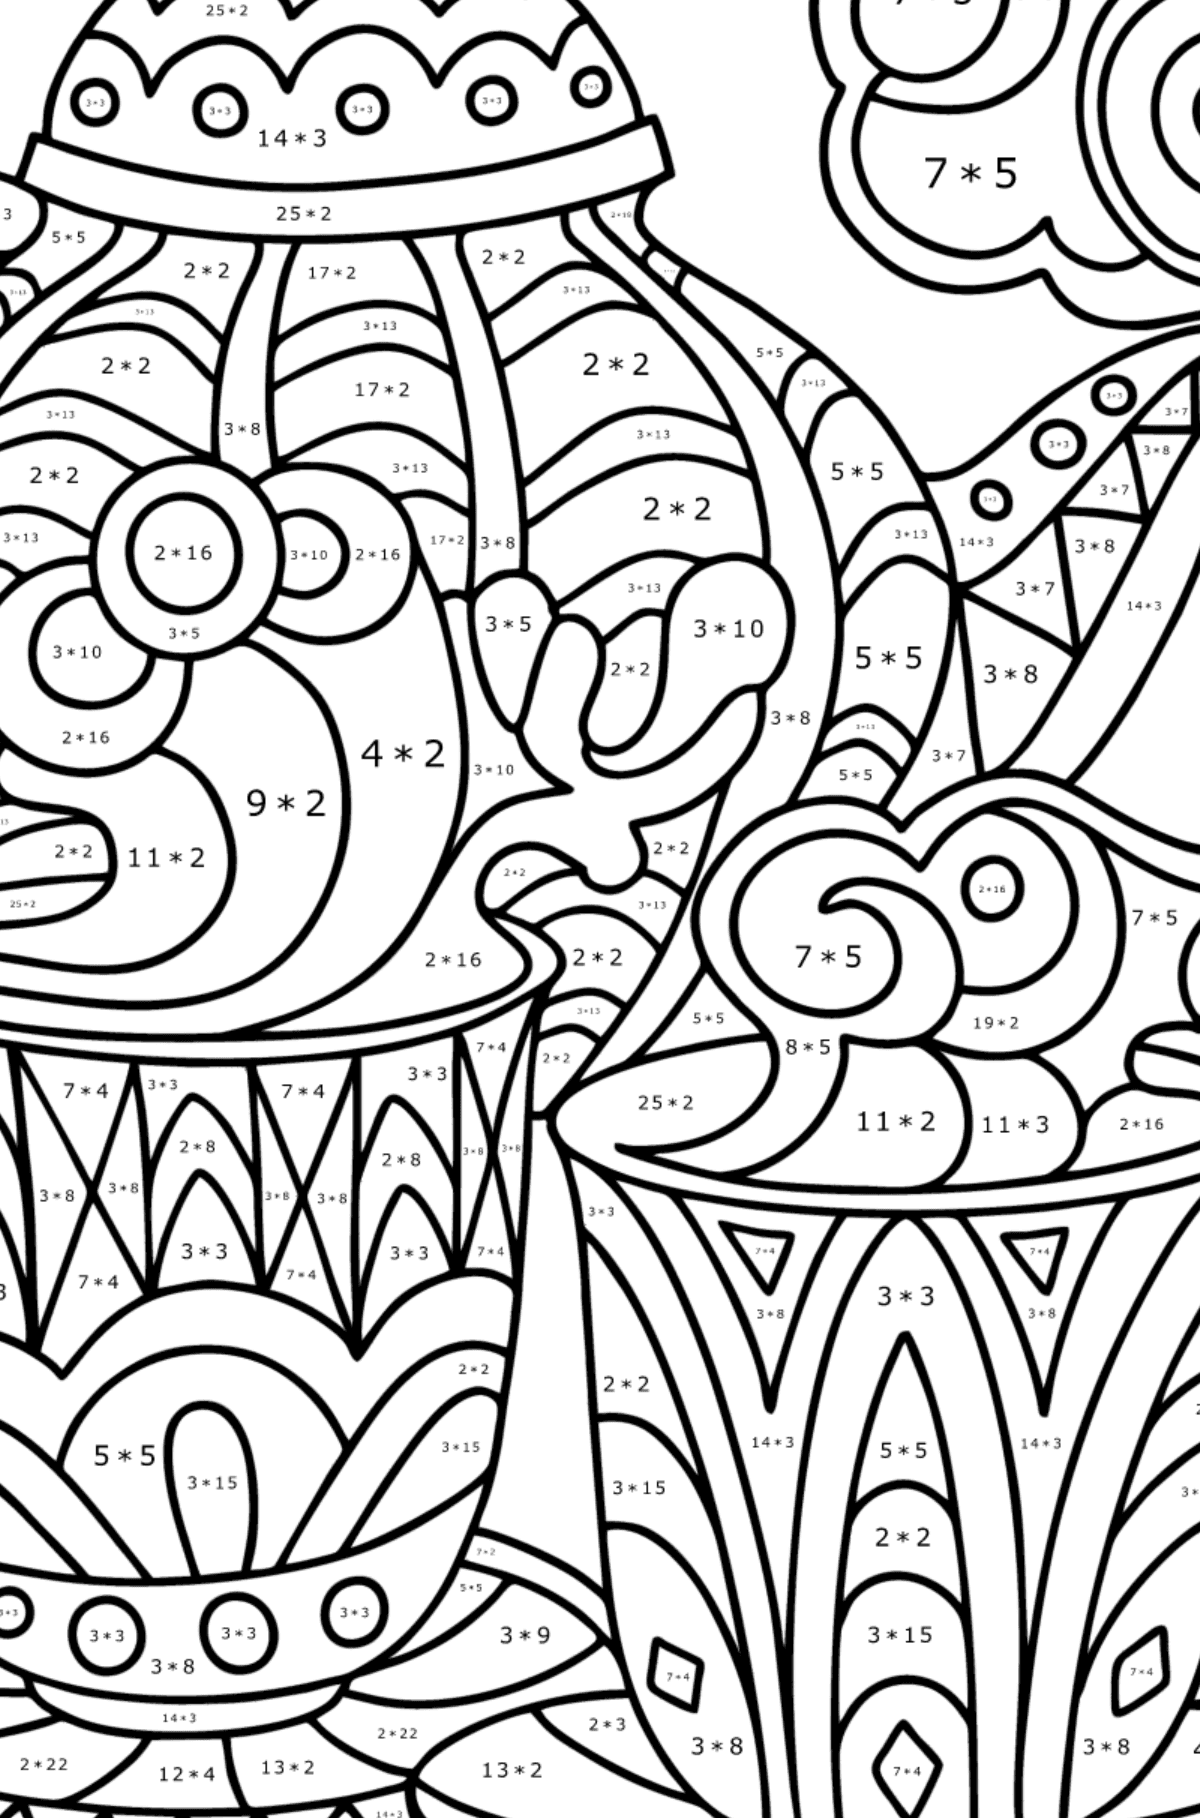 Doodle Coloring Page for Kids - Tea Party - Math Coloring - Multiplication for Kids